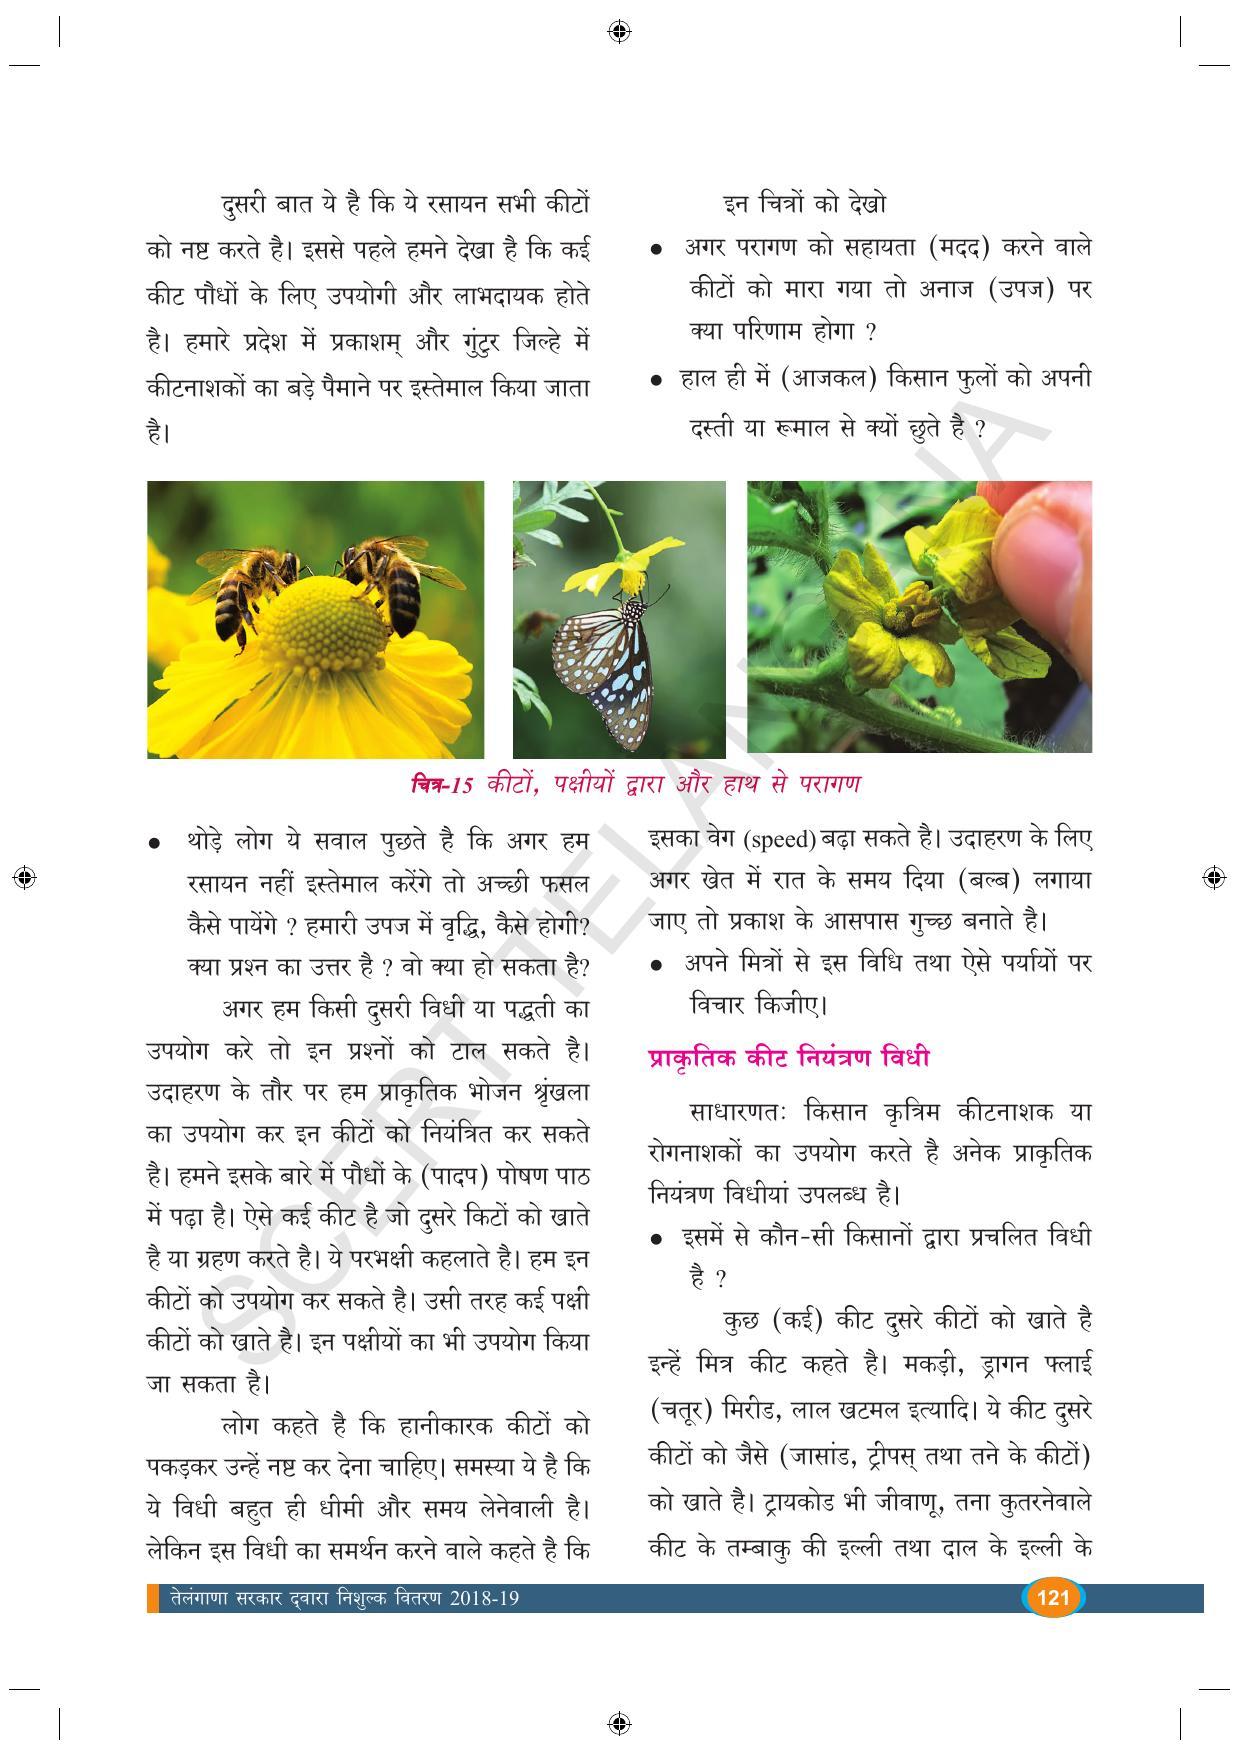 TS SCERT Class 9 Biological Science (Hindi Medium) Text Book - Page 133